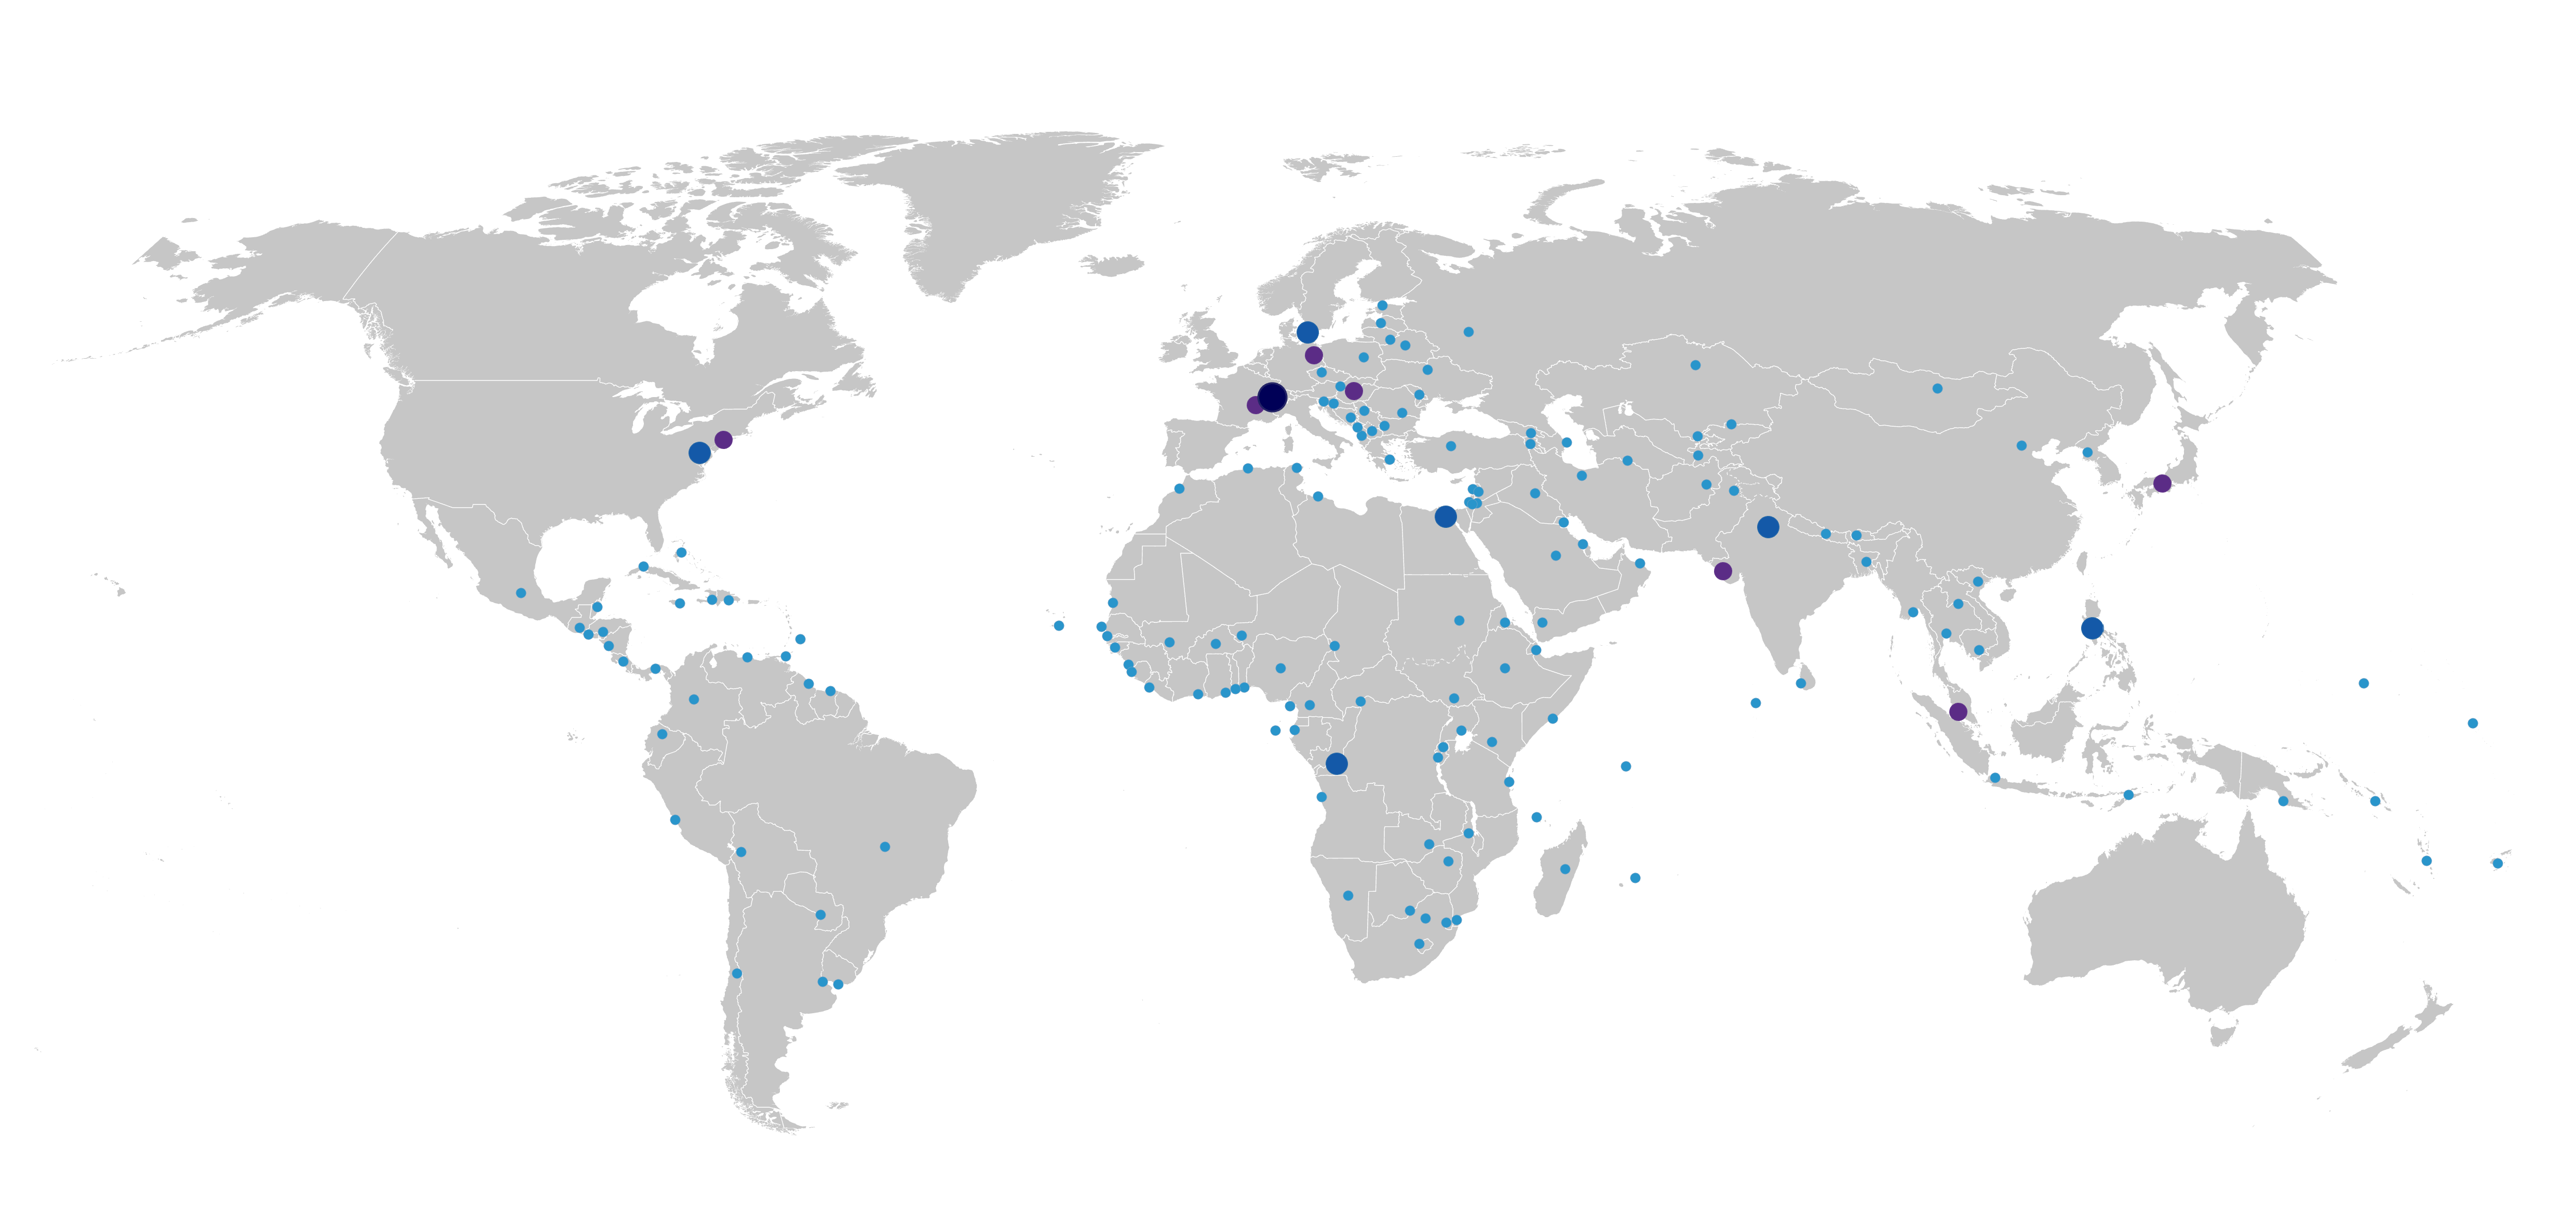 World map showing where WHO has Headquarters, Regional and Country offices.